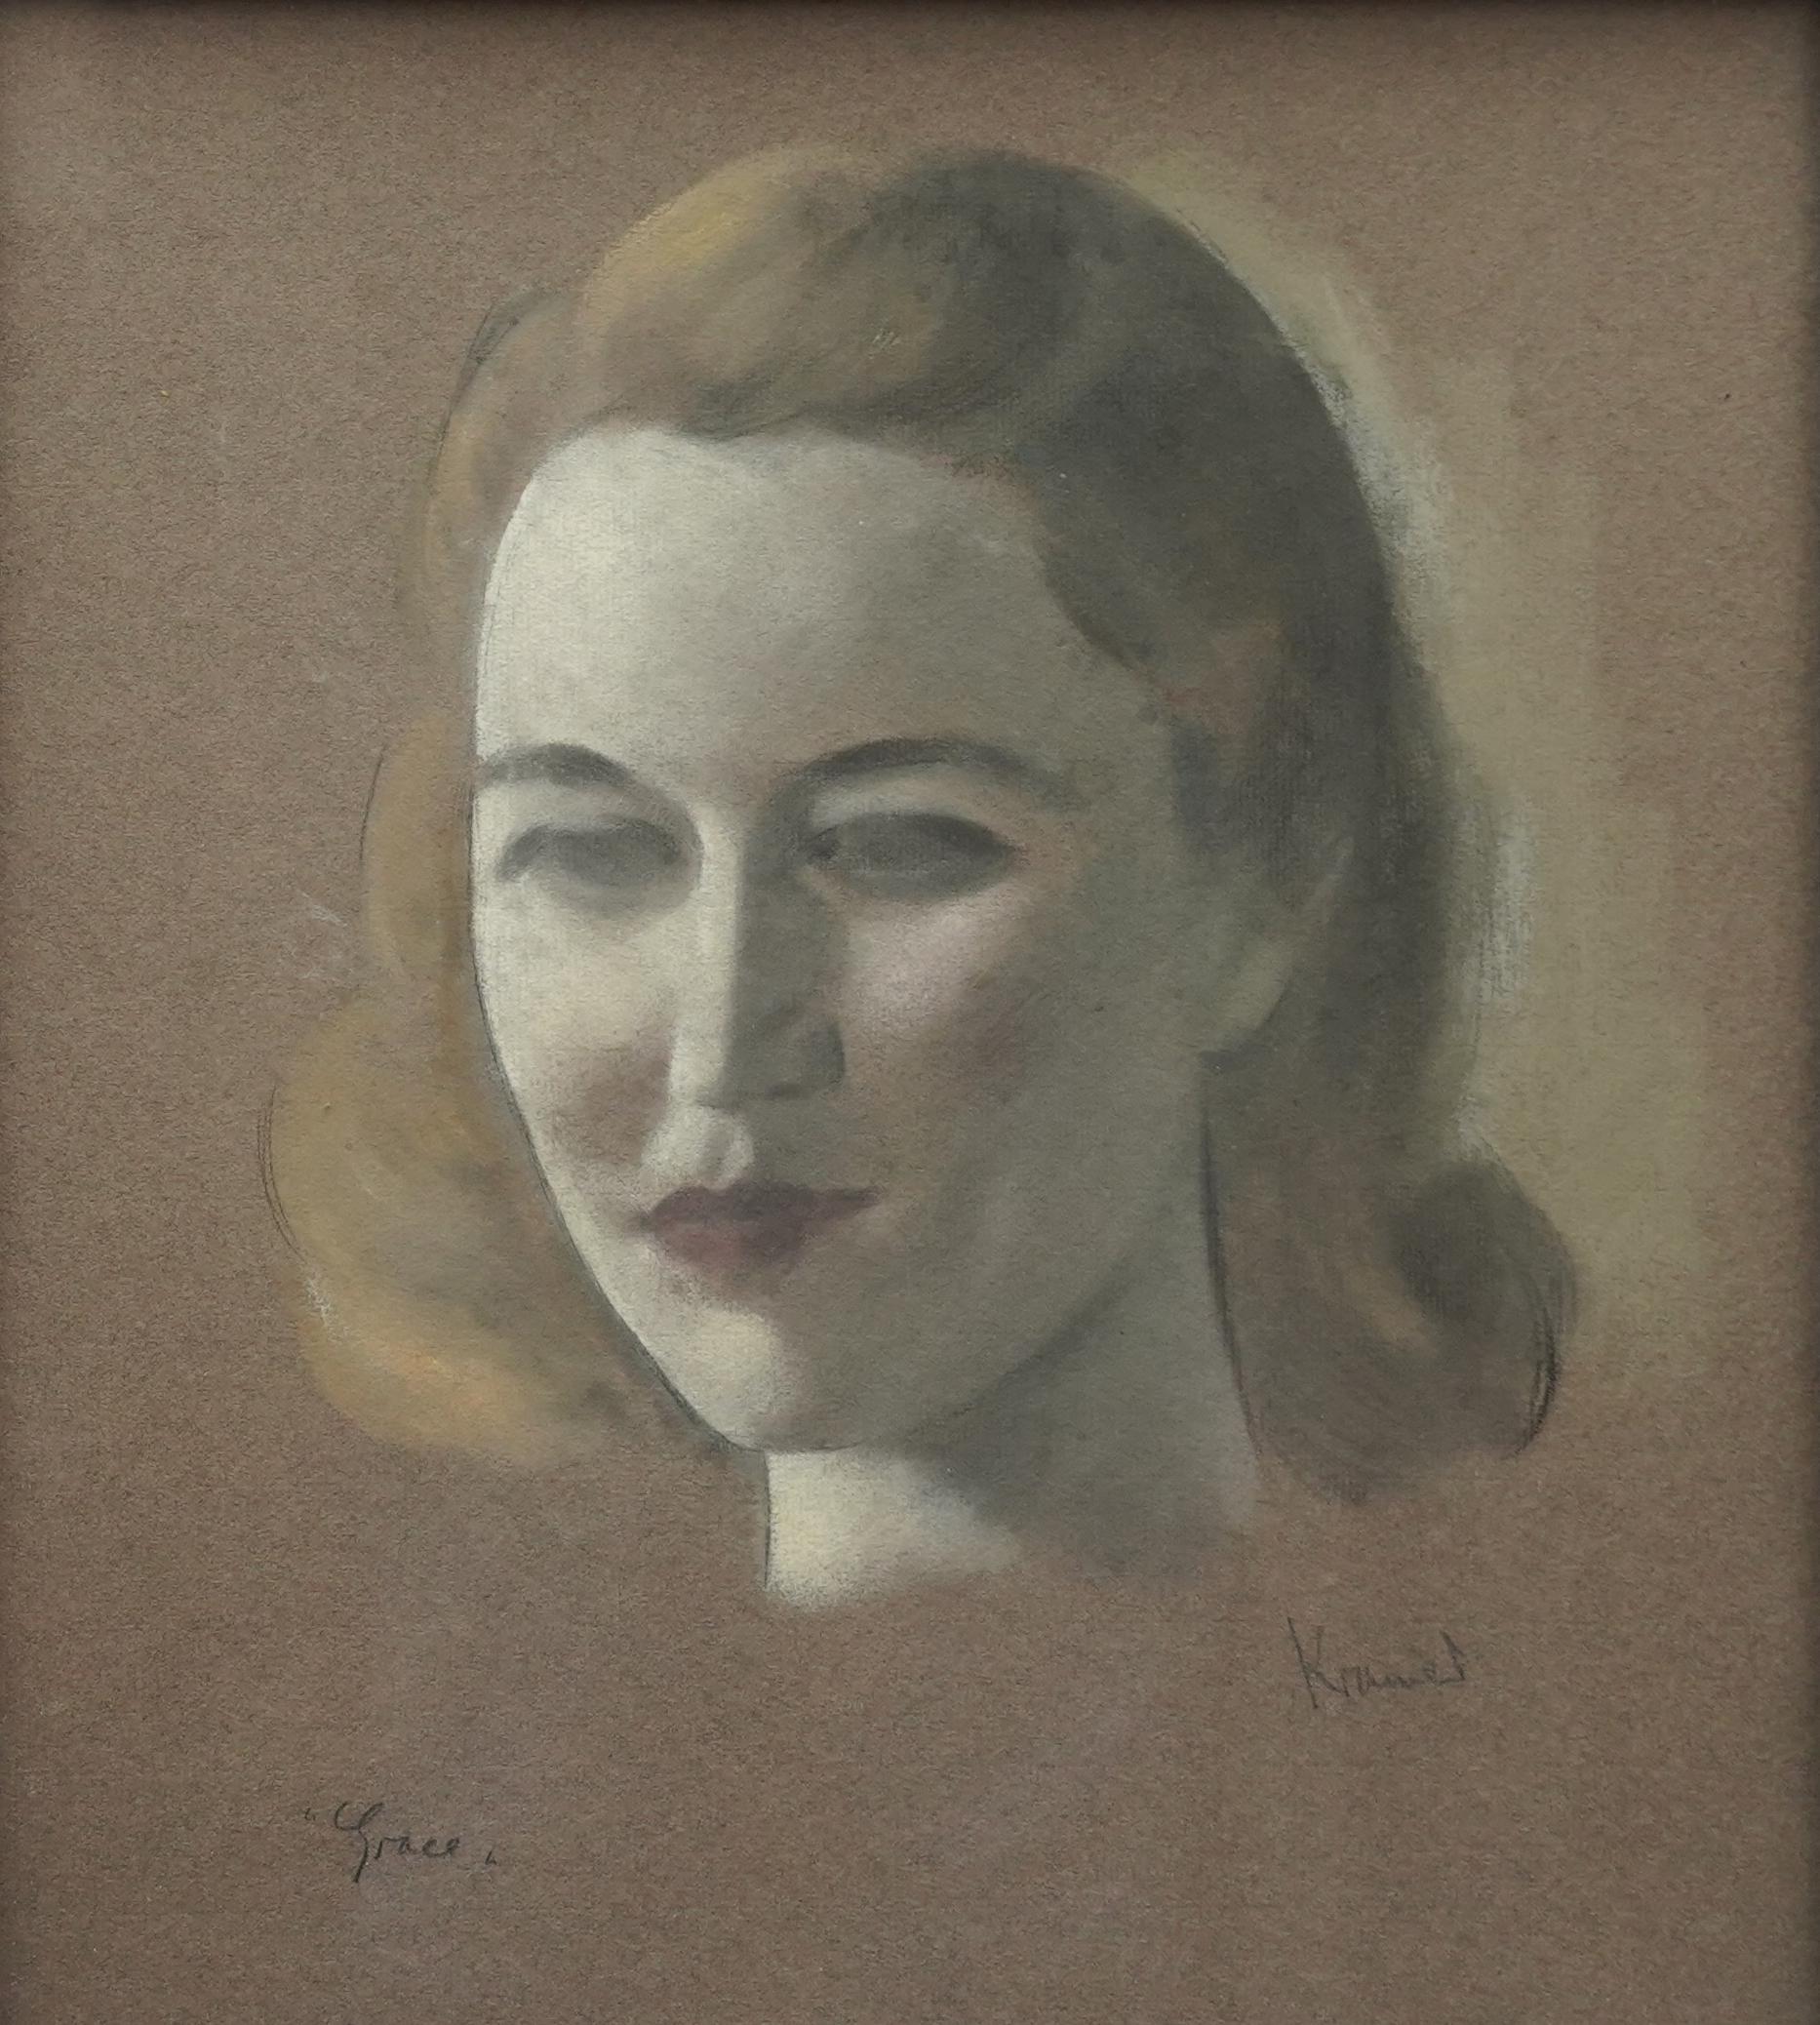 This enigmatic 1920's Art Deco portrait is by noted Russian born British artist Jacob Kramer. Worked in chalk/pastel on paper it is a portrait of 'Grace'. There is strong emphasis on her eyes and red lips with a halo of blonde hair. A really